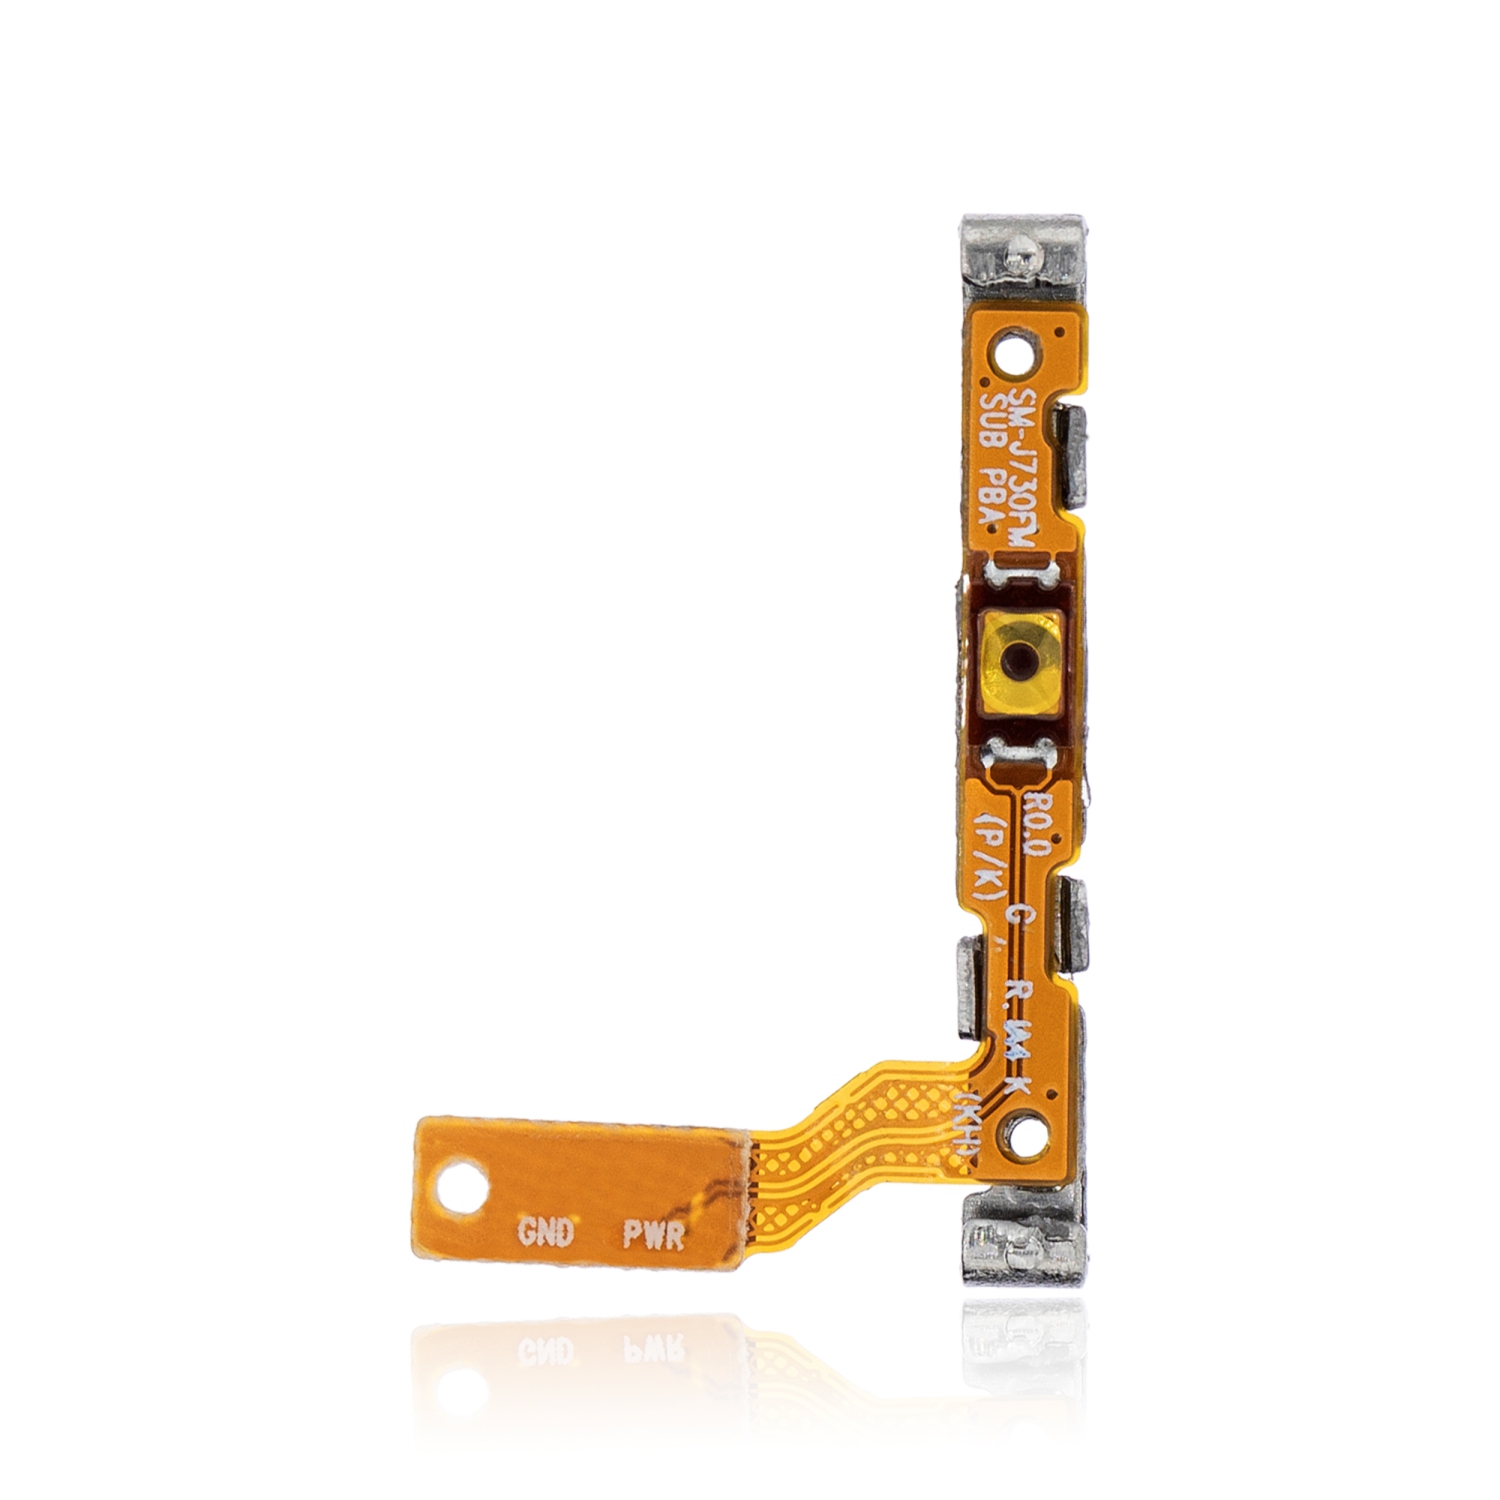 Replacement Power Button Flex Cable Compatible For Samsung Galaxy J7 Prime (G610 / 2016) And Galaxy J7 Pro (J730 / 2017)